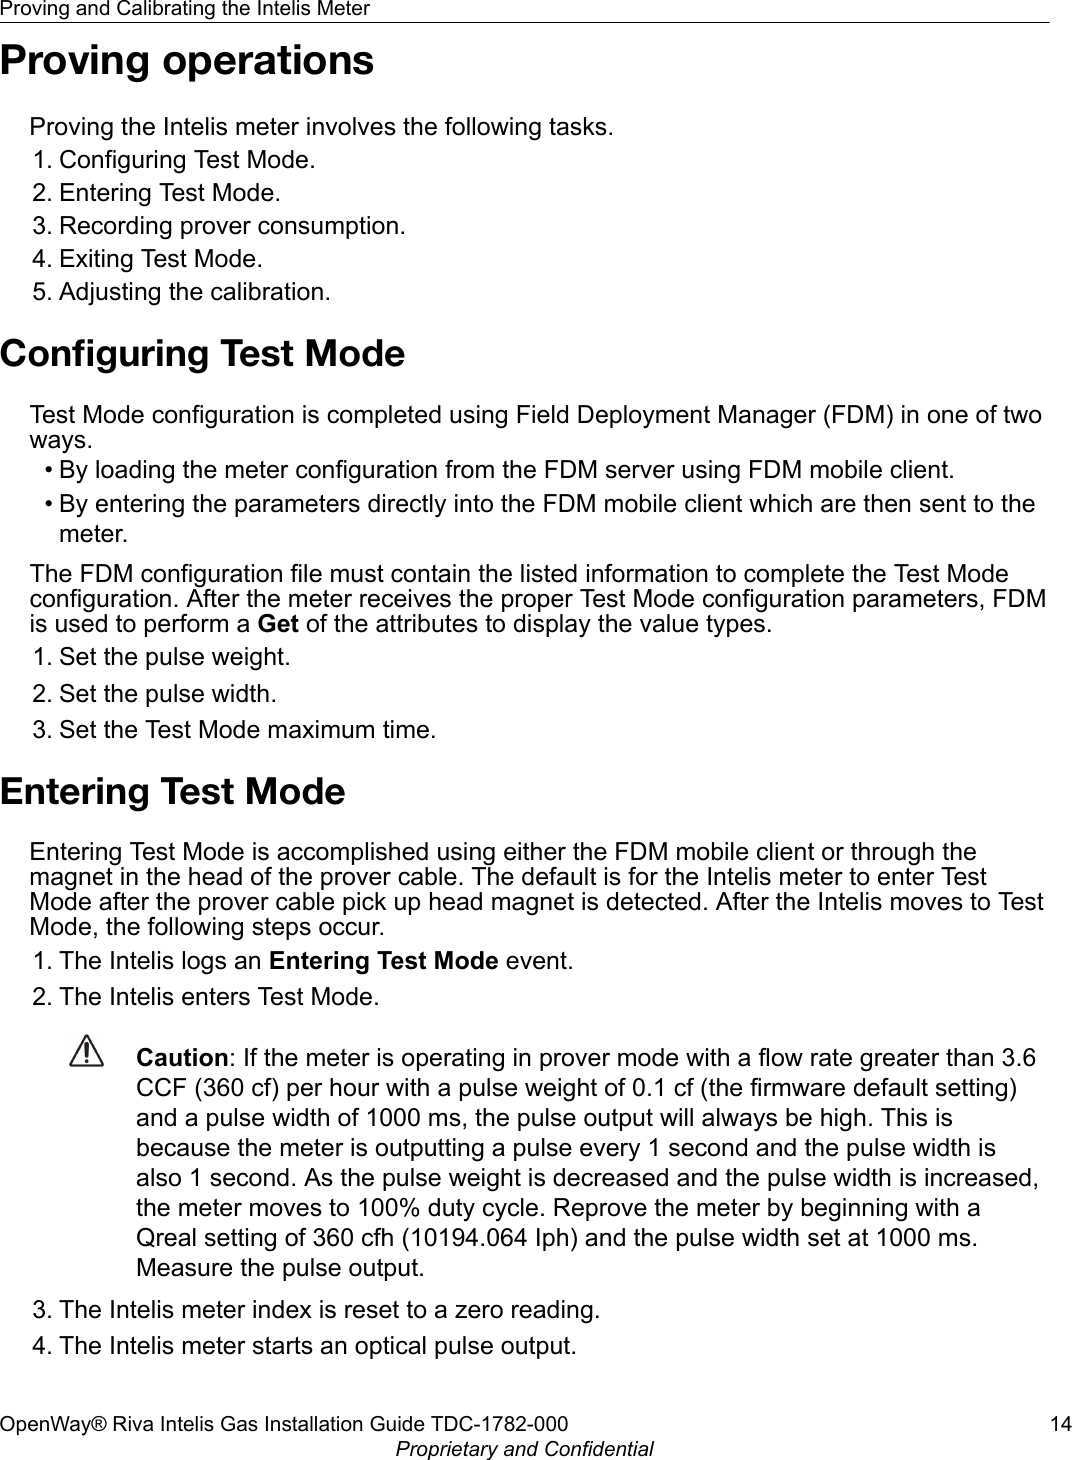 Proving operationsProving the Intelis meter involves the following tasks.1. Configuring Test Mode.2. Entering Test Mode.3. Recording prover consumption.4. Exiting Test Mode.5. Adjusting the calibration.Conﬁguring Test ModeTest Mode configuration is completed using Field Deployment Manager (FDM) in one of twoways.• By loading the meter configuration from the FDM server using FDM mobile client.• By entering the parameters directly into the FDM mobile client which are then sent to themeter.The FDM configuration file must contain the listed information to complete the Test Modeconfiguration. After the meter receives the proper Test Mode configuration parameters, FDMis used to perform a Get of the attributes to display the value types.1. Set the pulse weight.2. Set the pulse width.3. Set the Test Mode maximum time.Entering Test ModeEntering Test Mode is accomplished using either the FDM mobile client or through themagnet in the head of the prover cable. The default is for the Intelis meter to enter TestMode after the prover cable pick up head magnet is detected. After the Intelis moves to TestMode, the following steps occur.1. The Intelis logs an Entering Test Mode event.2. The Intelis enters Test Mode.Caution: If the meter is operating in prover mode with a flow rate greater than 3.6CCF (360 cf) per hour with a pulse weight of 0.1 cf (the firmware default setting)and a pulse width of 1000 ms, the pulse output will always be high. This isbecause the meter is outputting a pulse every 1 second and the pulse width isalso 1 second. As the pulse weight is decreased and the pulse width is increased,the meter moves to 100% duty cycle. Reprove the meter by beginning with aQreal setting of 360 cfh (10194.064 Iph) and the pulse width set at 1000 ms.Measure the pulse output.3. The Intelis meter index is reset to a zero reading.4. The Intelis meter starts an optical pulse output.Proving and Calibrating the Intelis MeterOpenWay® Riva Intelis Gas Installation Guide TDC-1782-000 14Proprietary and Confidential